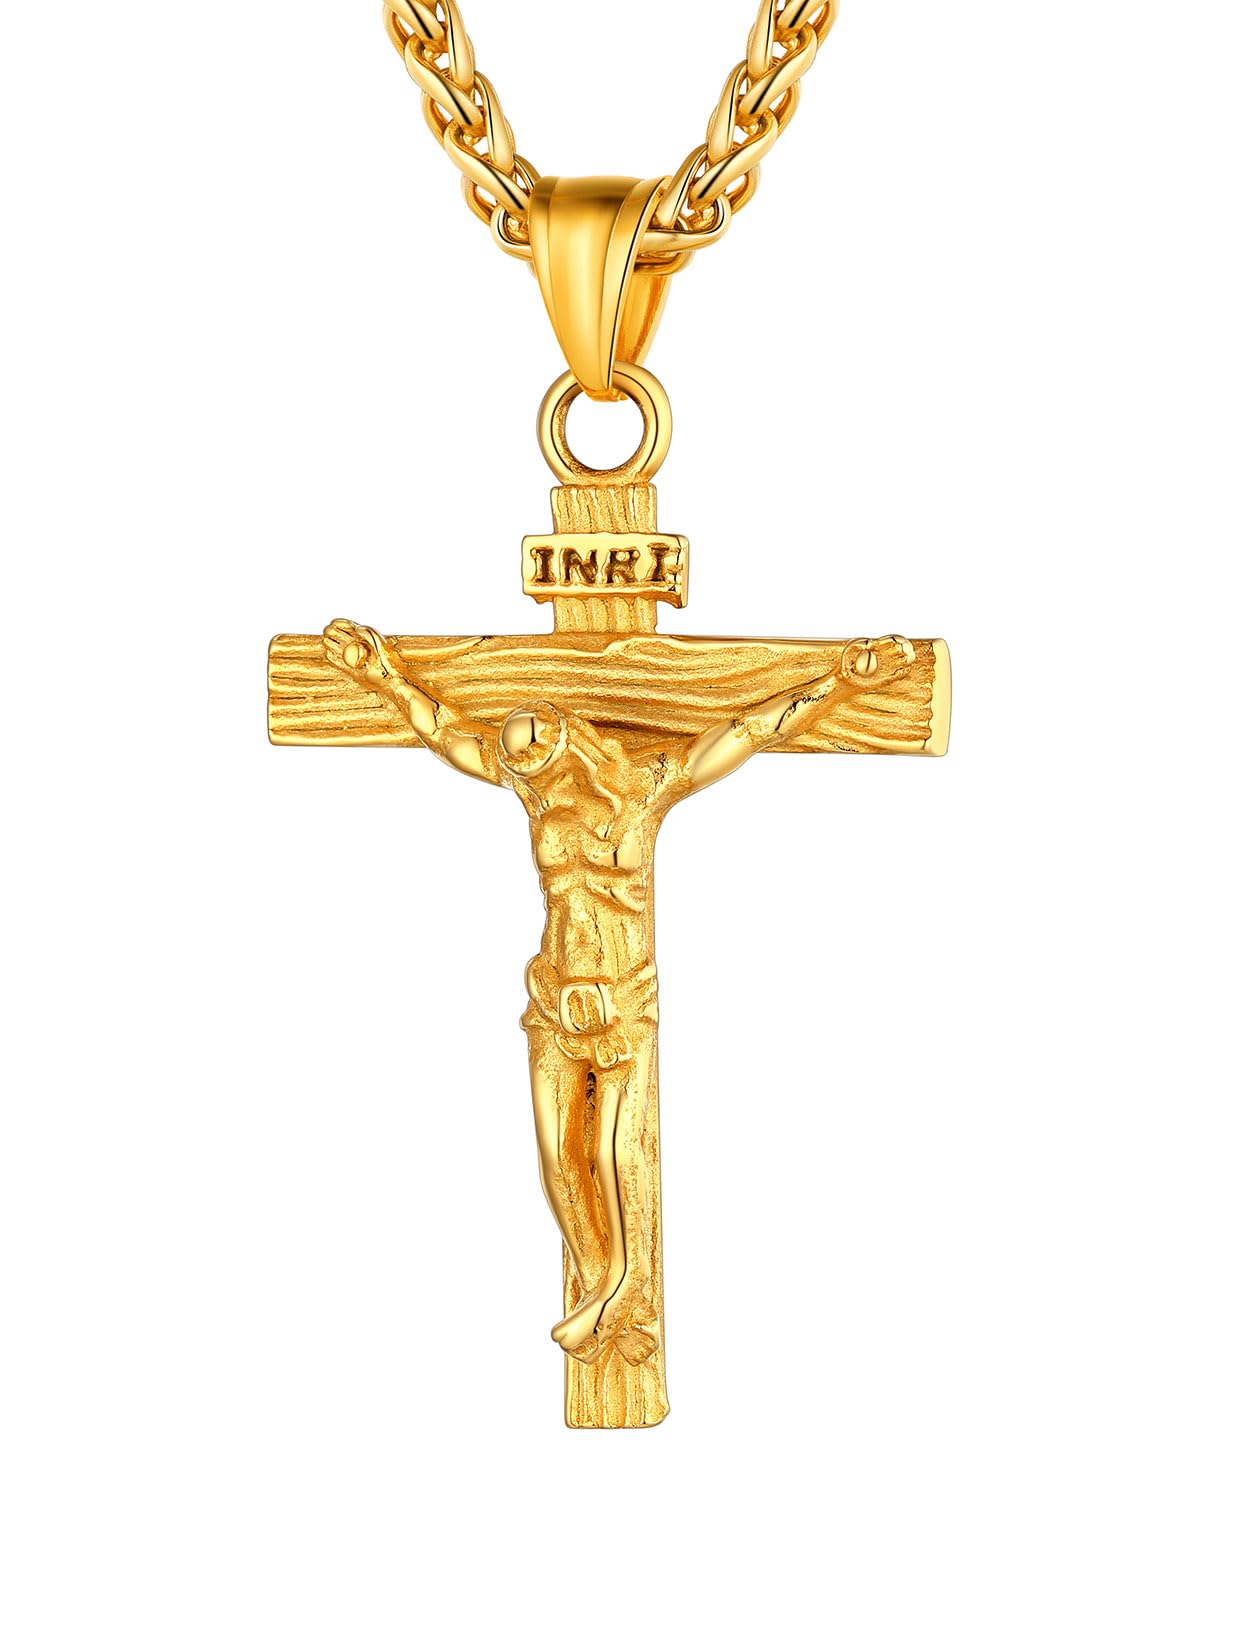 U7 Men Crucifix Cross Pendant with Chain Baptism Christian Jewelry Stainless Steel/18K Gold Antique Jesus Necklace, Gift Packed,Length 22